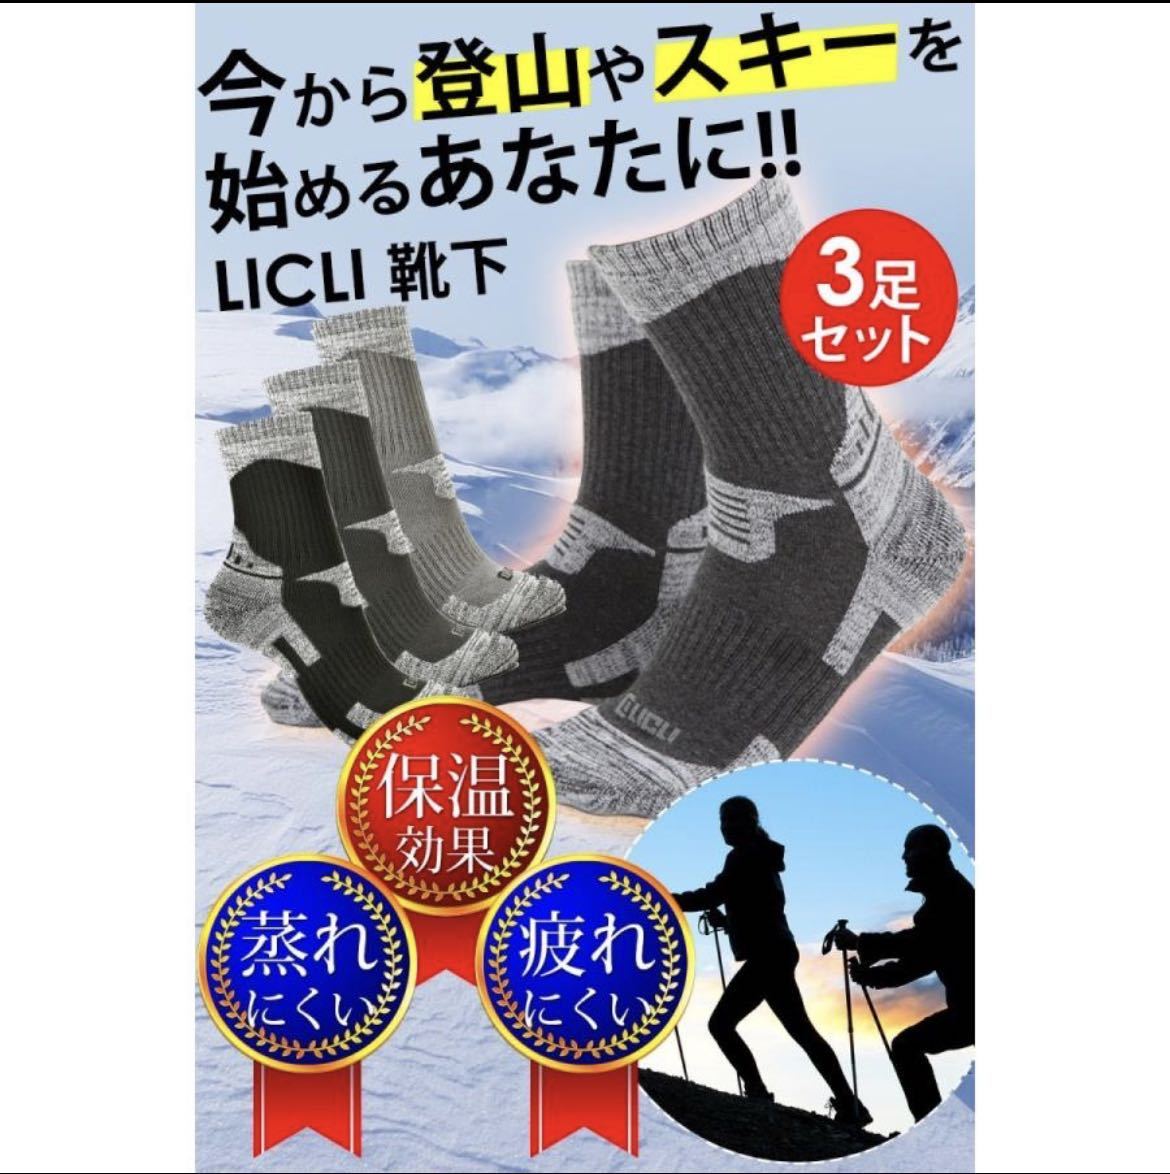  same day shipping mountain climbing for socks 3 pair 3 color set mountain climbing ski outdoor LICLI reclining i shoes underwear pressure thick heat insulation free men's socks sport black 